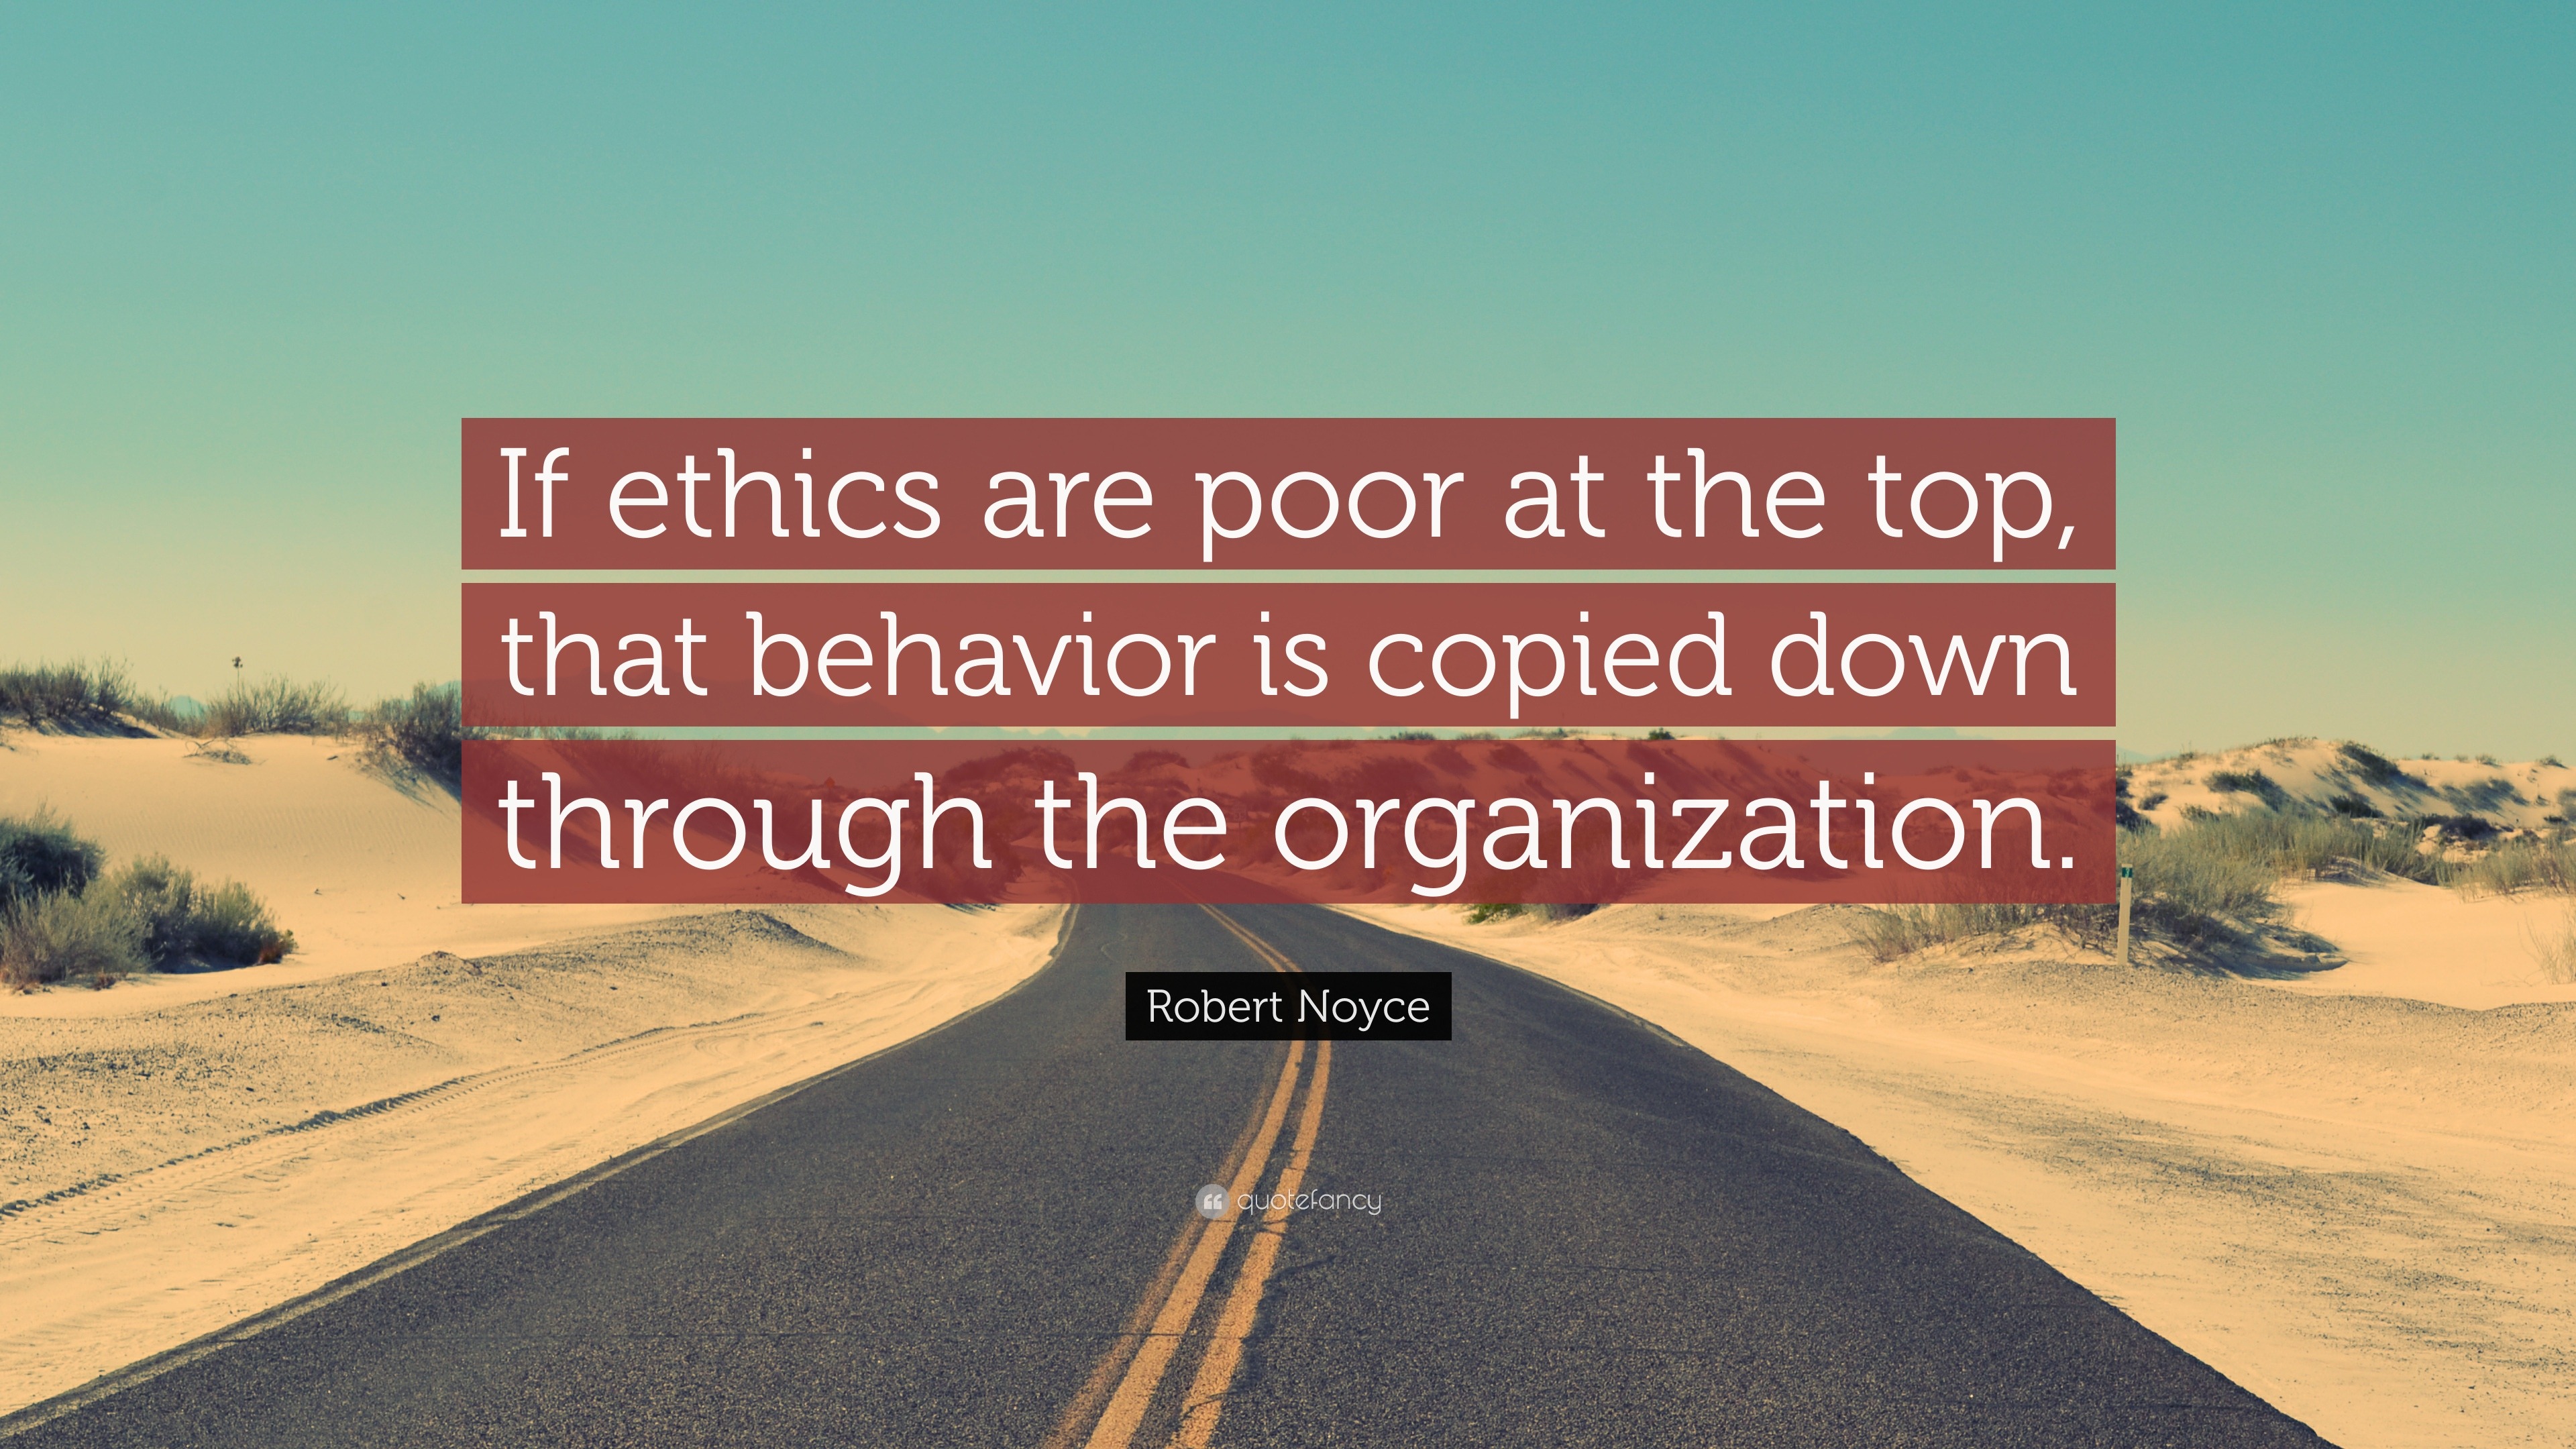 Robert Noyce Quote: “If ethics are poor at the top, that behavior is